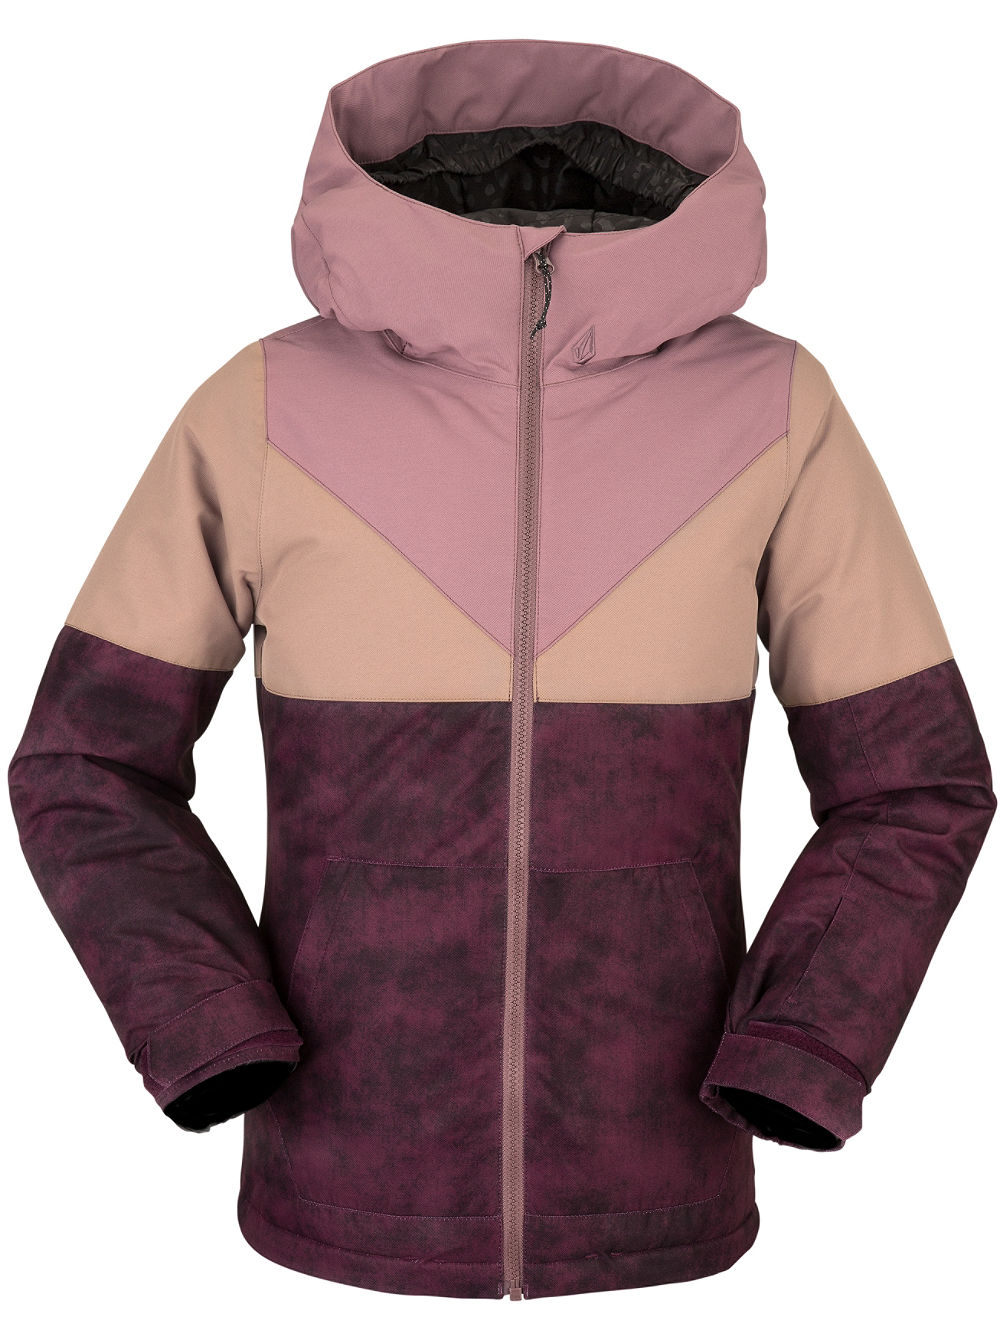 Westerlies Insulated Chaqueta